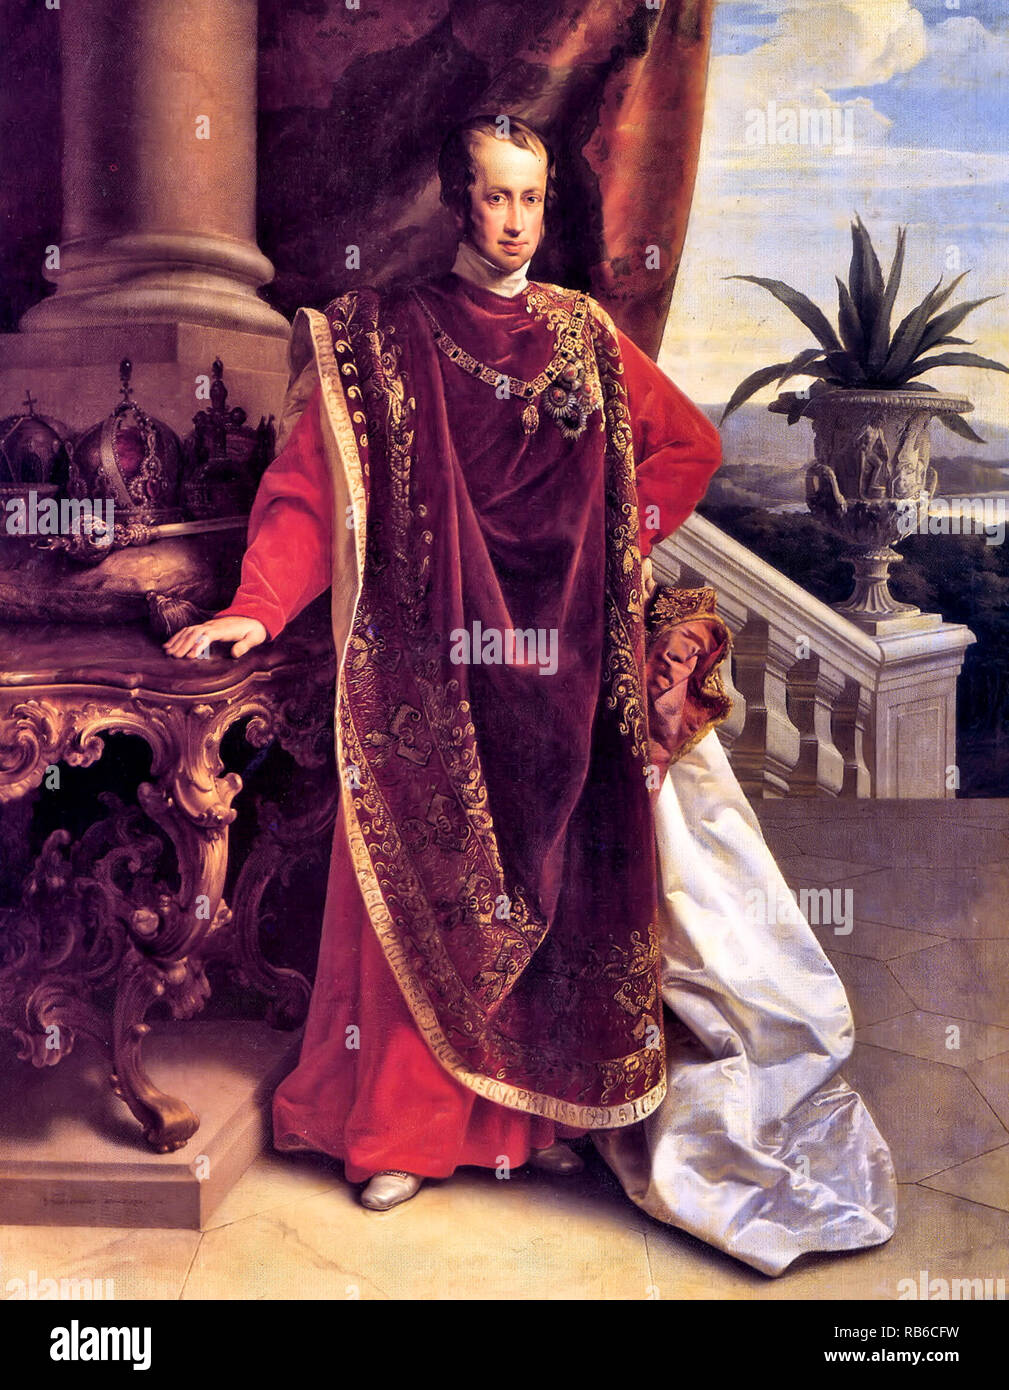 Ferdinand I of Austria, Portrait of Emperor Ferdinand I in ceremonial robe of Order of the Golden Fleece Ferdinand I (19 April 1793 – 29 June 1875) was the Emperor of Austria from 1835 until his abdication in 1848. As ruler of Austria, he was also President of the German Confederation, King of Hungary, Croatia and Bohemia (as Ferdinand V), King of Lombardy–Venetia and holder of many other lesser titles (see grand title of the Emperor of Austria). by Leopold Kupelwieser Stock Photo